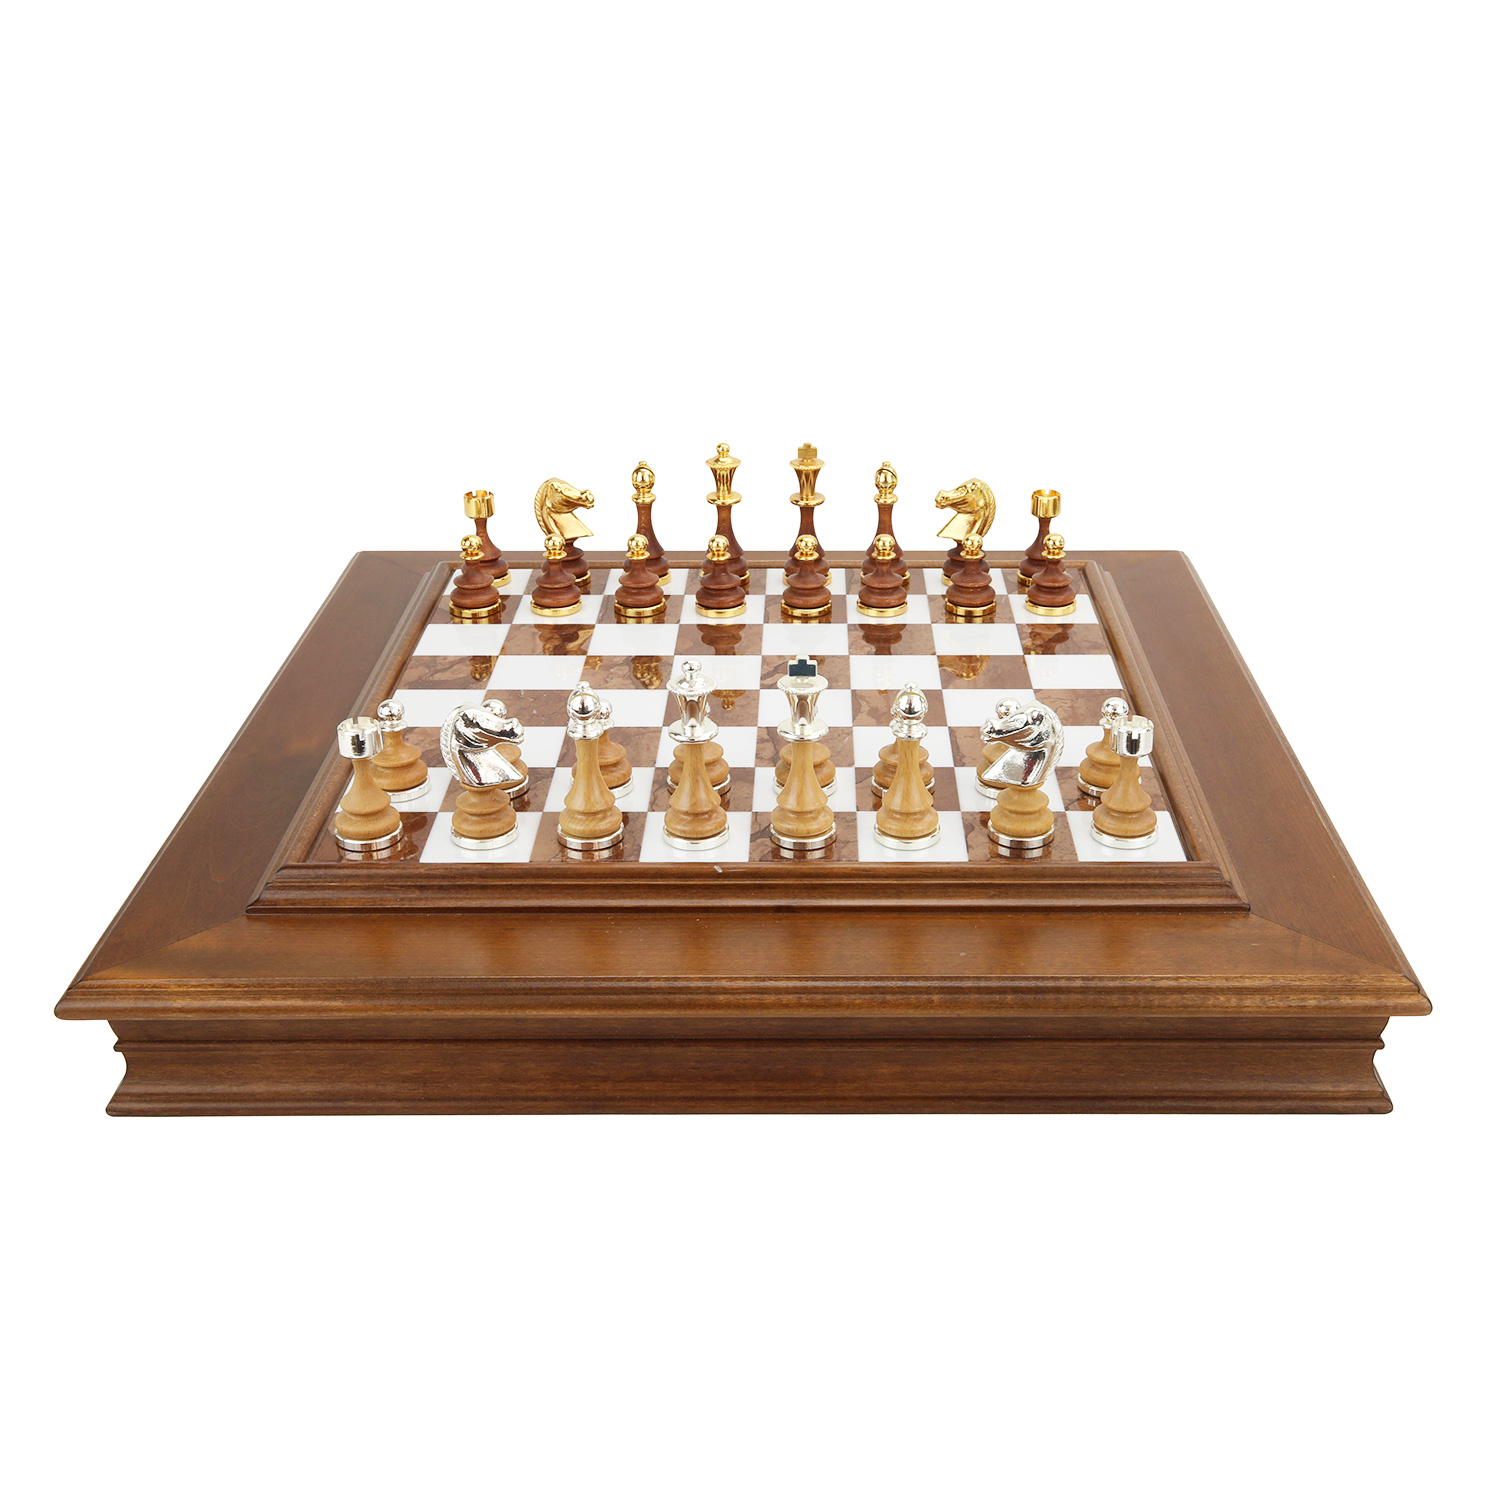 Marble Patterned Chess Box Set with Gold/Silver Metal Chessmen